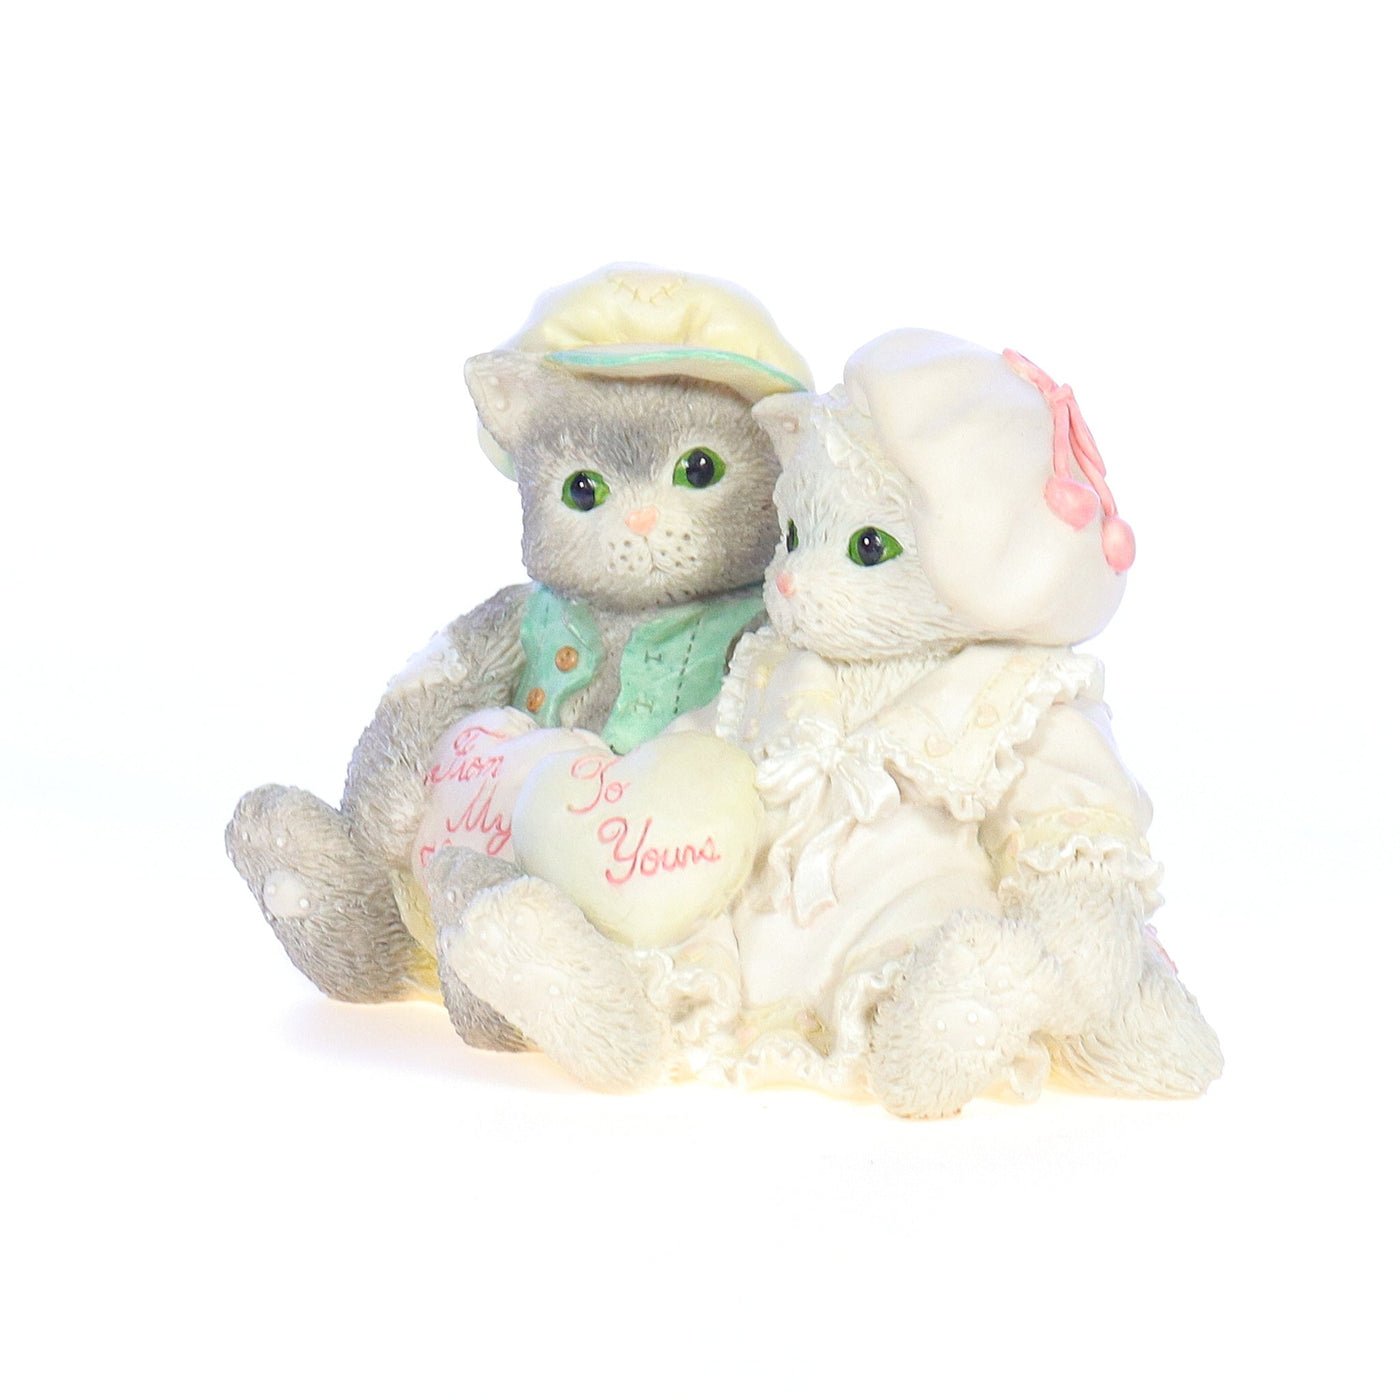 Calico_Kittens_Paws-itively_In_Love_Valentines_Day_Figurine_1994